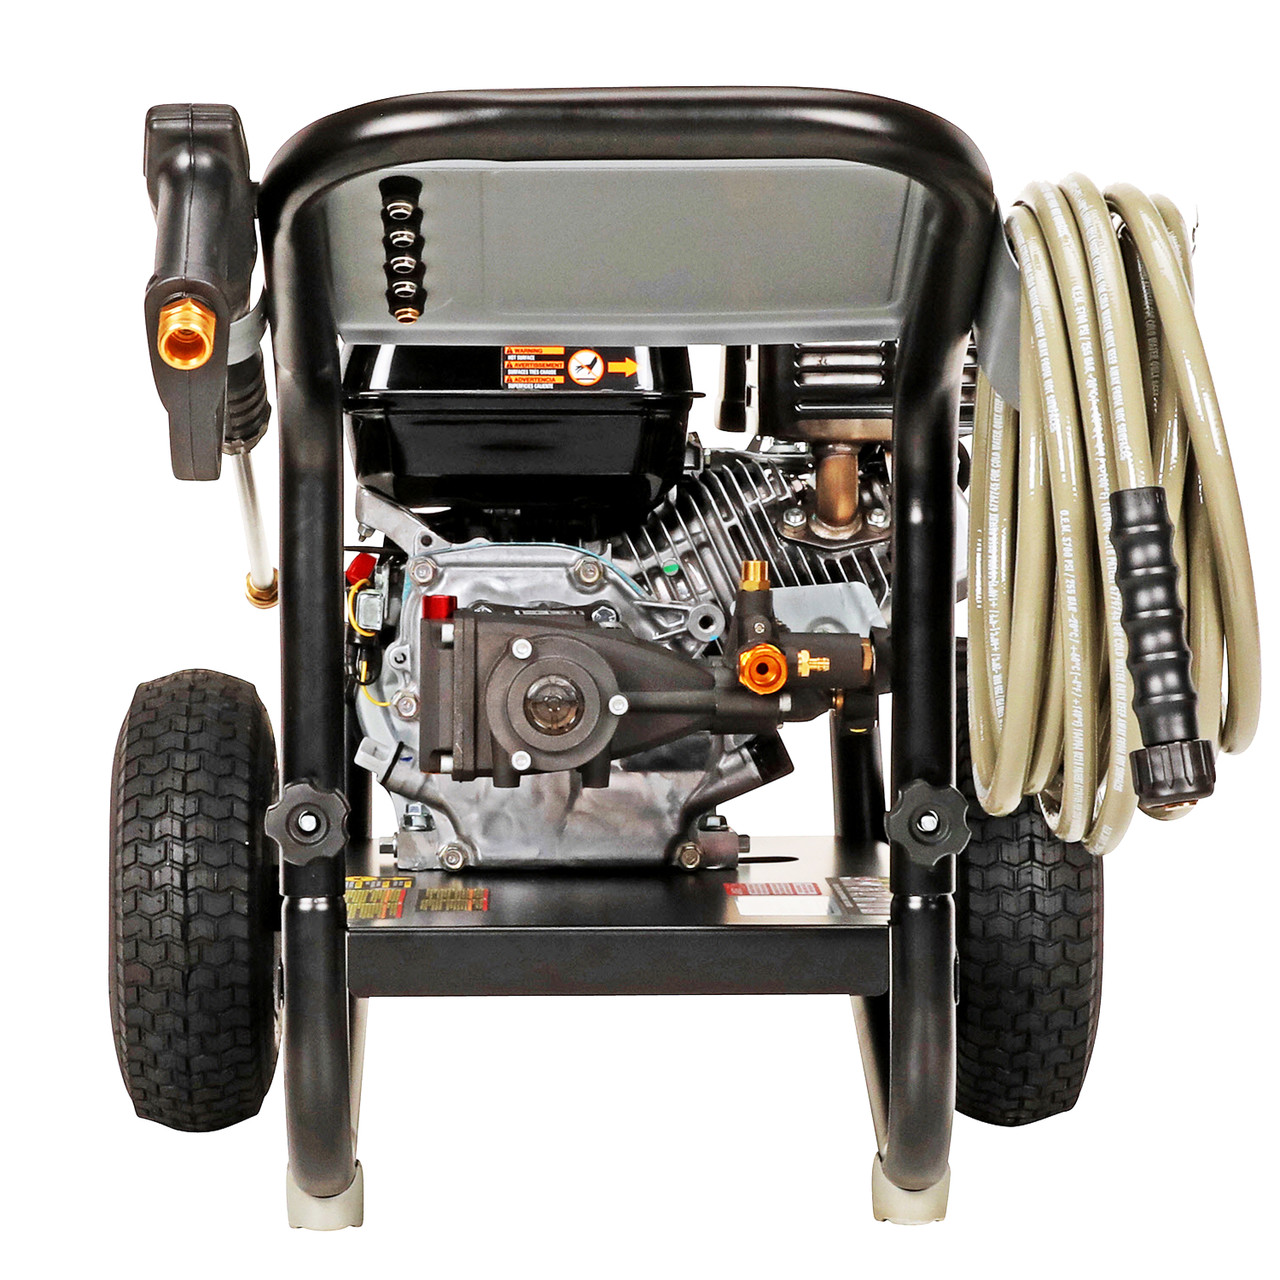 SIMPSON PowerShot PS3228-S Gas Pressure Washer 3300 PSI at 2.5 GPM